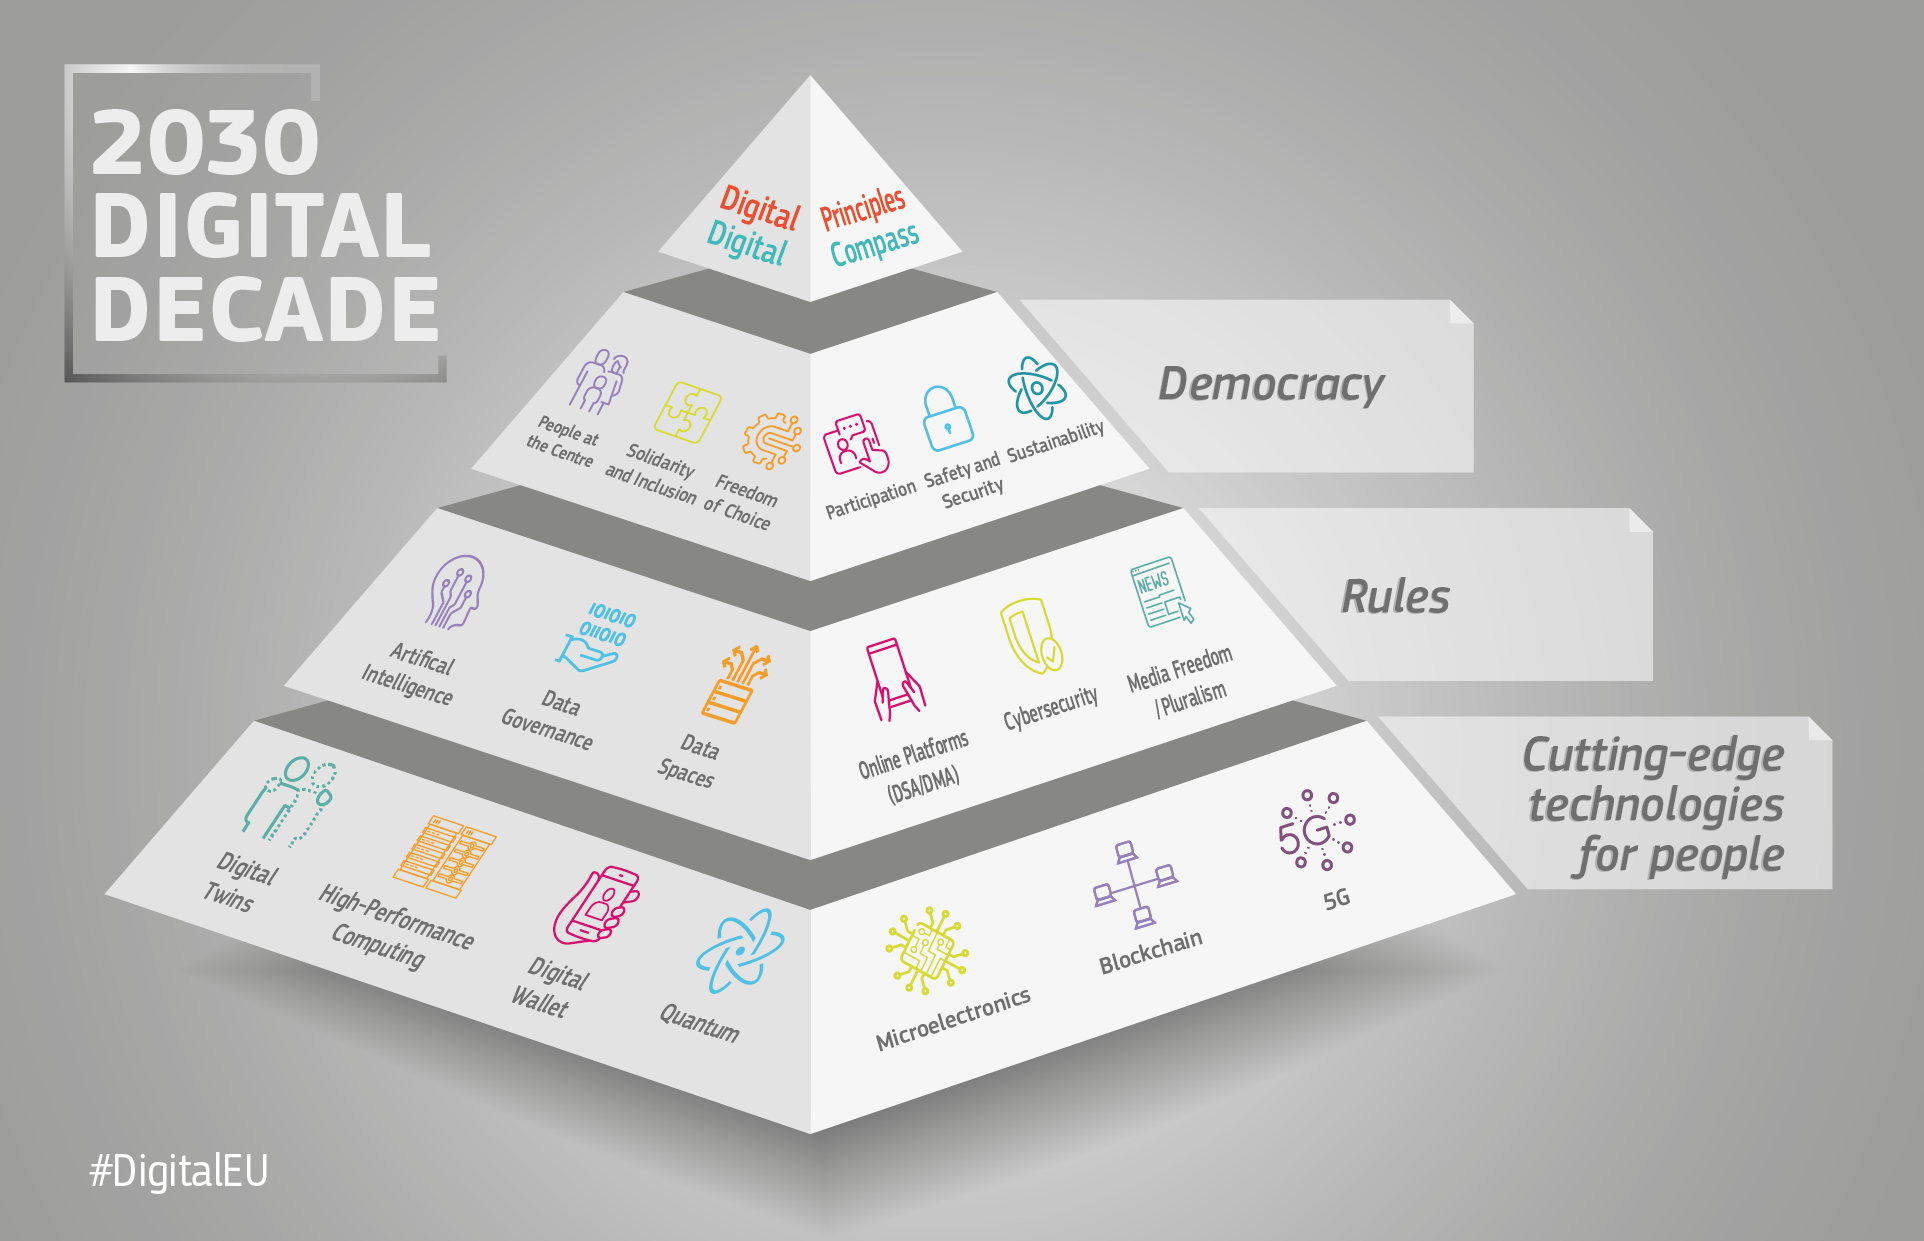 pyramid showing connection of digital decade policies and initiatives